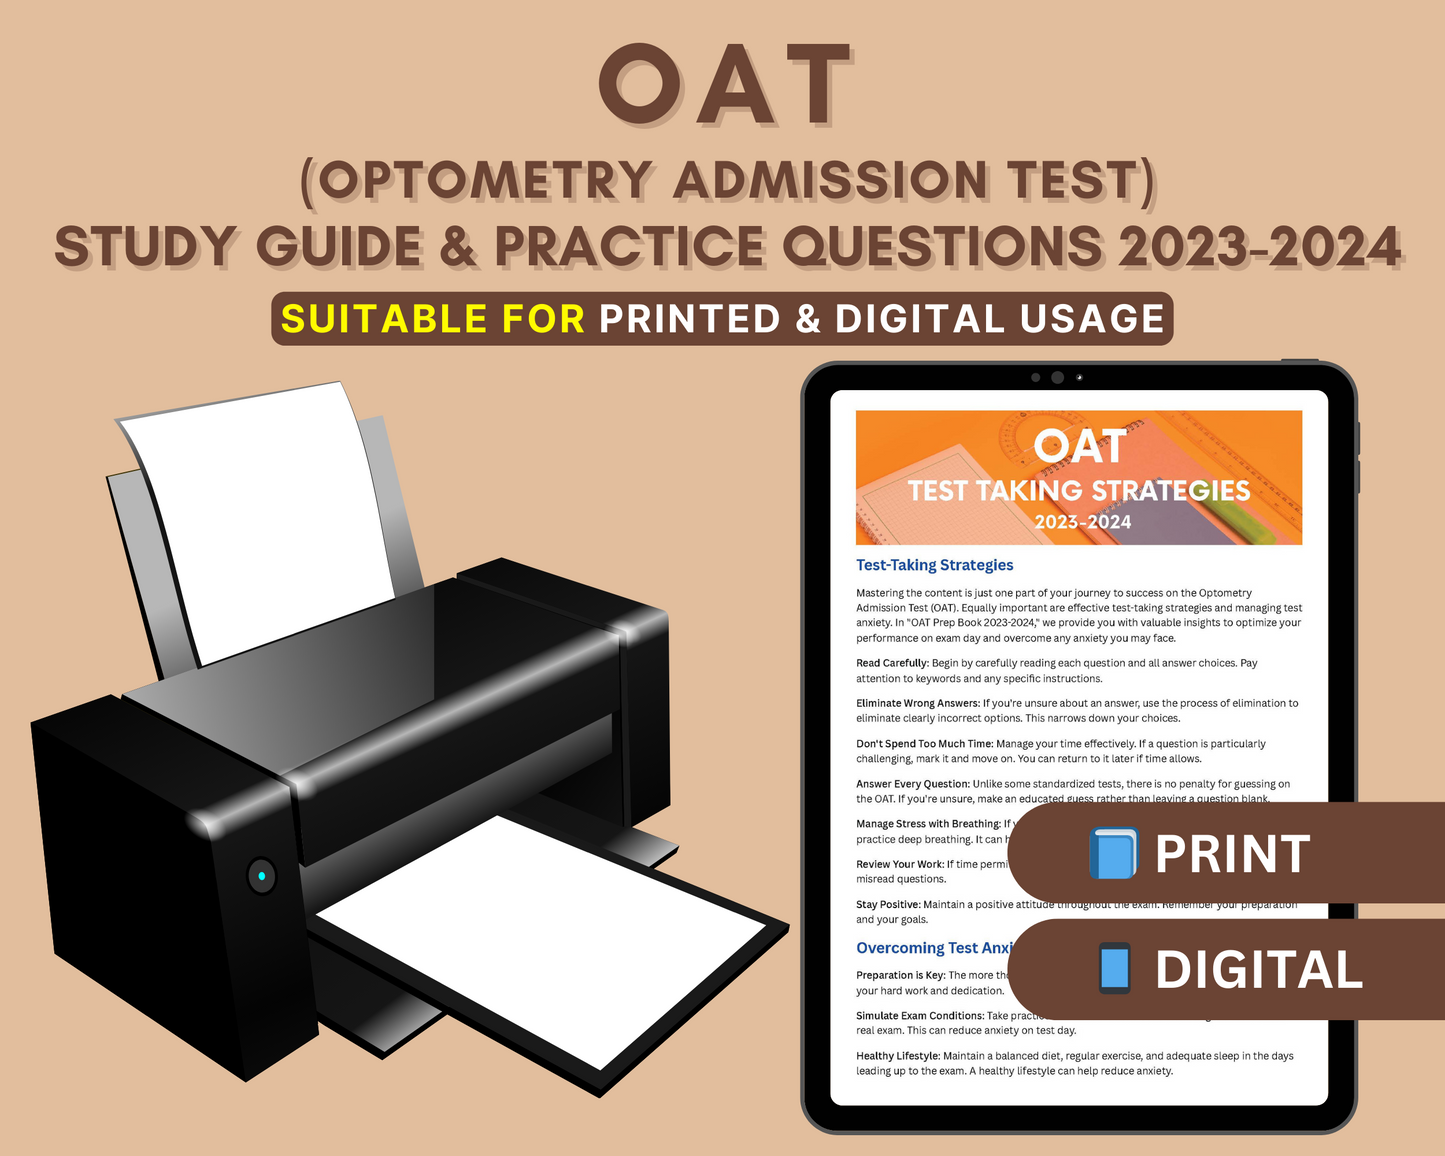 OAT Prep Study Guide 2023-2024: In-Depth Content Review, Practice Tests & Exam Strategies for Optometry Admission Test